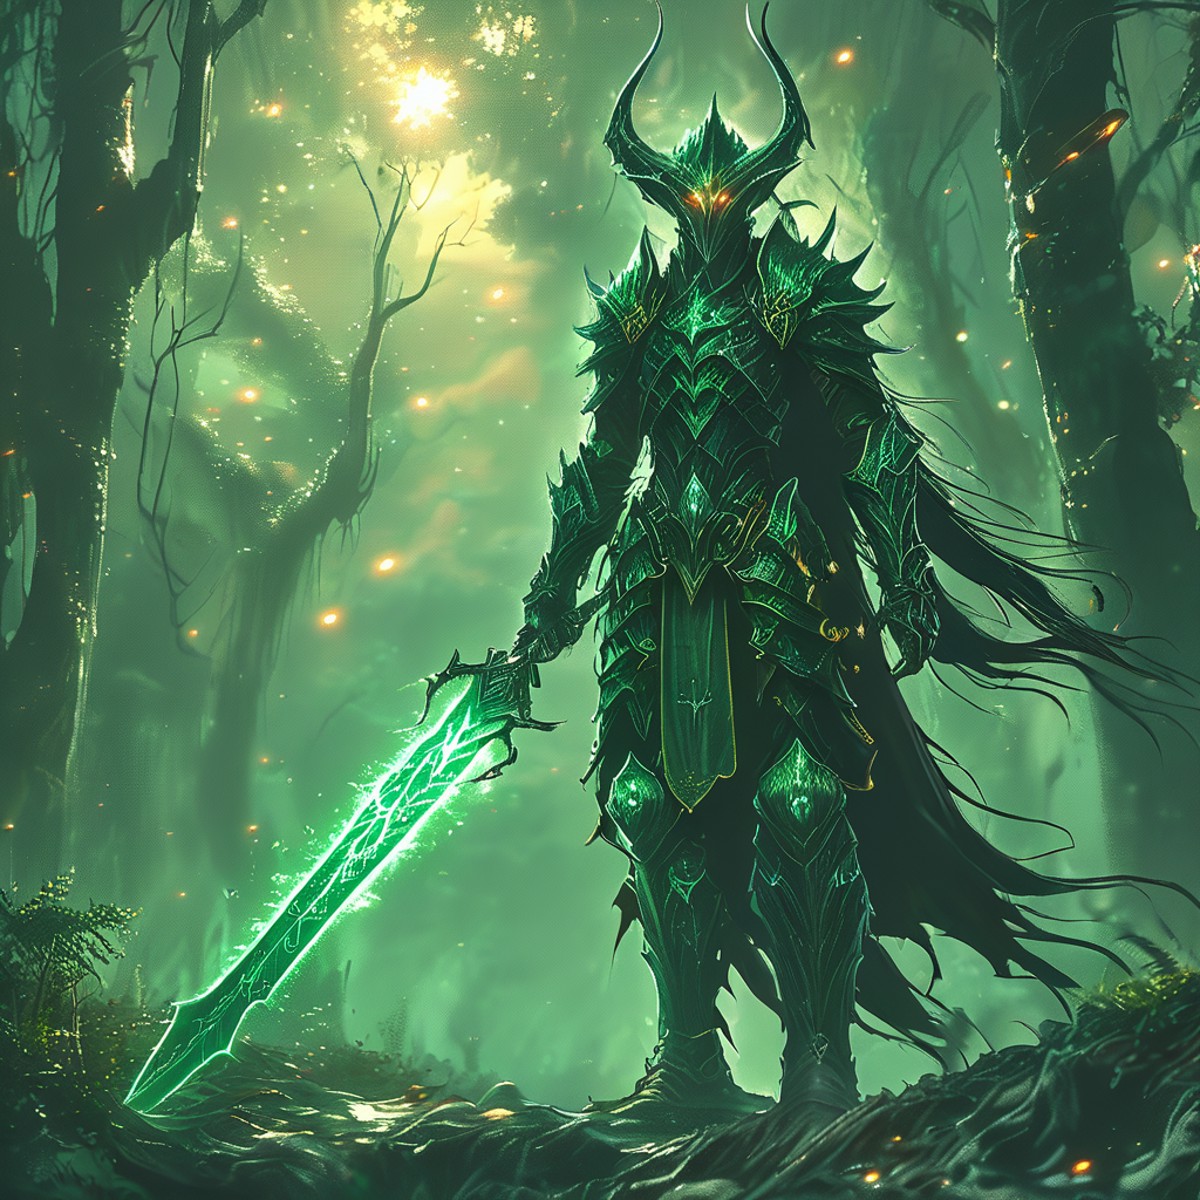 a cinematic shot of a fantasy forest elf, wearing armor, holding a glowing sword with bot hands, hkstyle, green glowing ma...